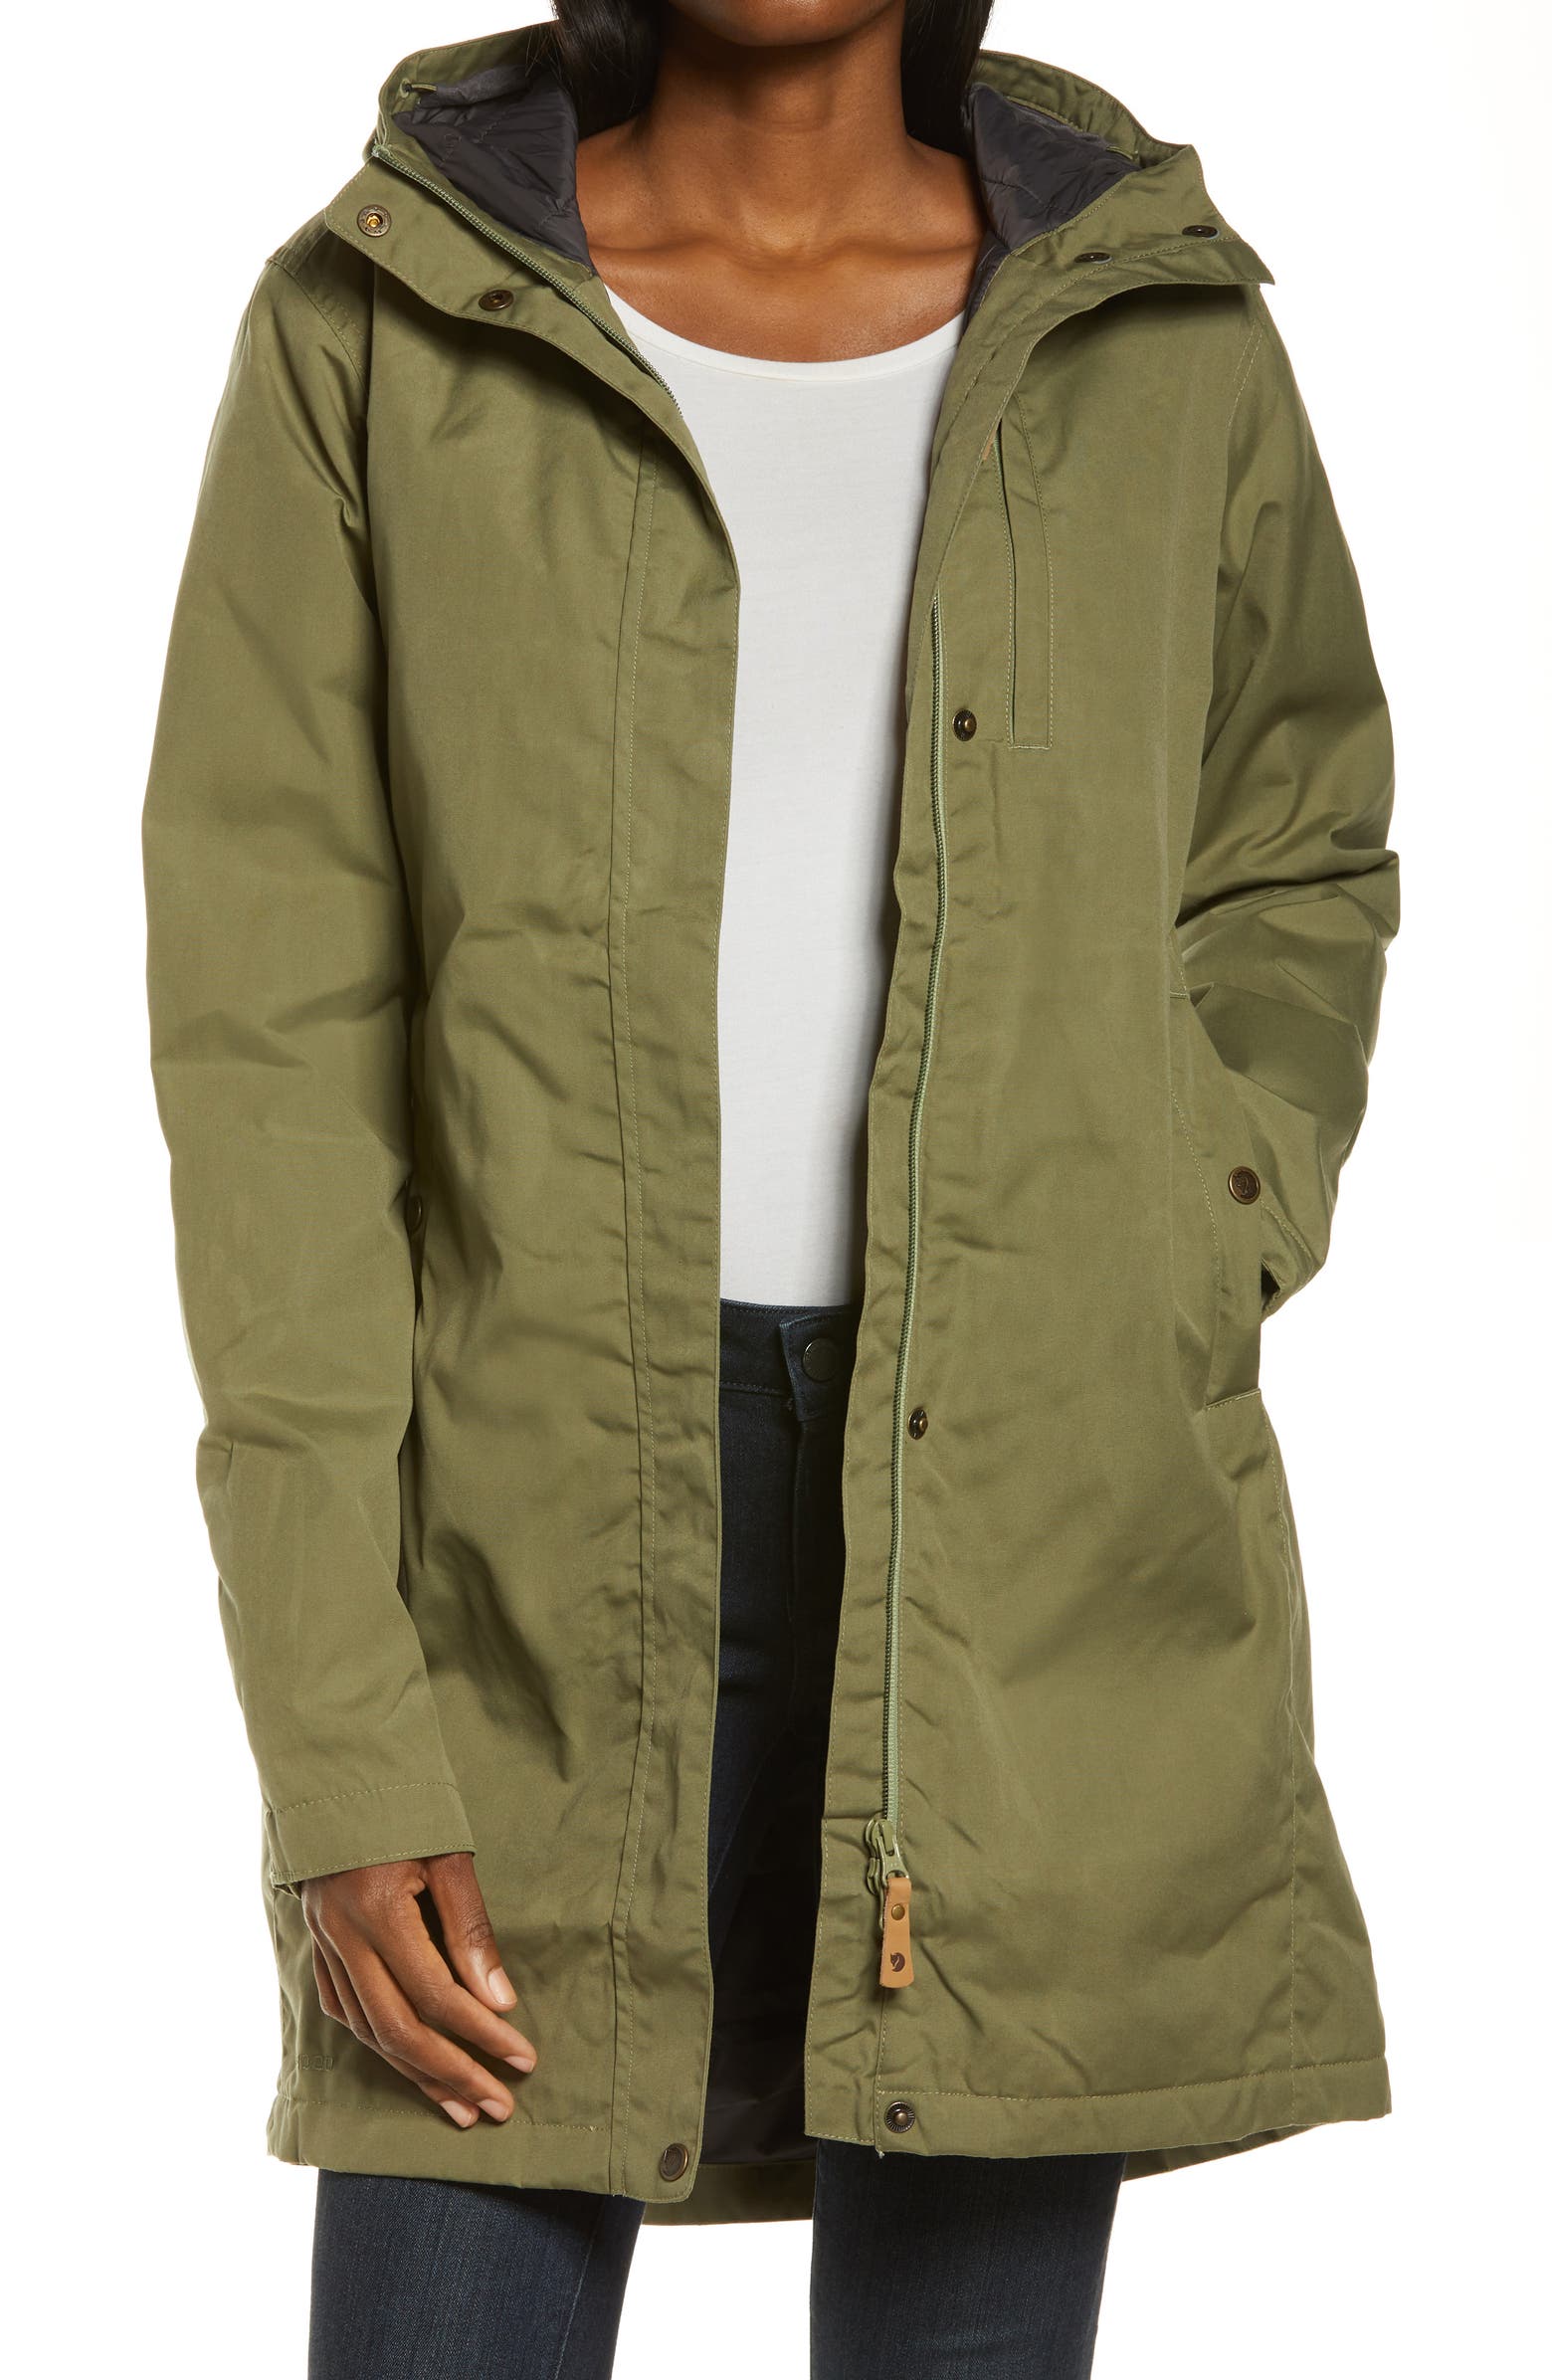 Long army green coat from Fjallraven